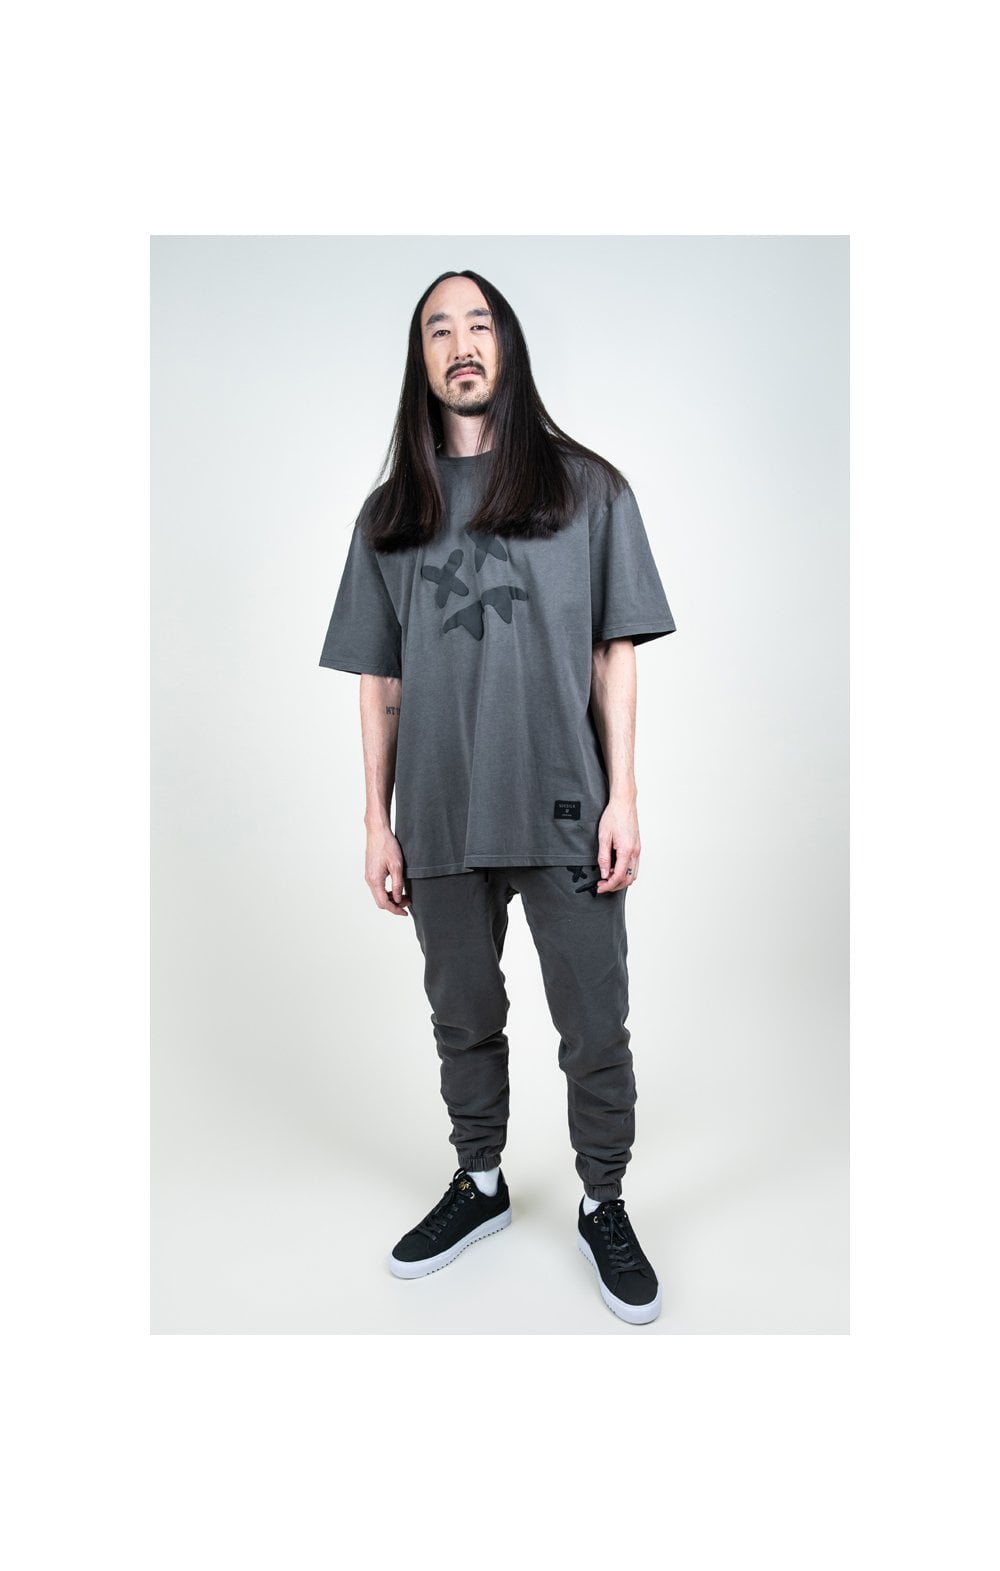 SikSilk X Steve Aoki S/S Oversize Essential Tee – Washed Grey (4)